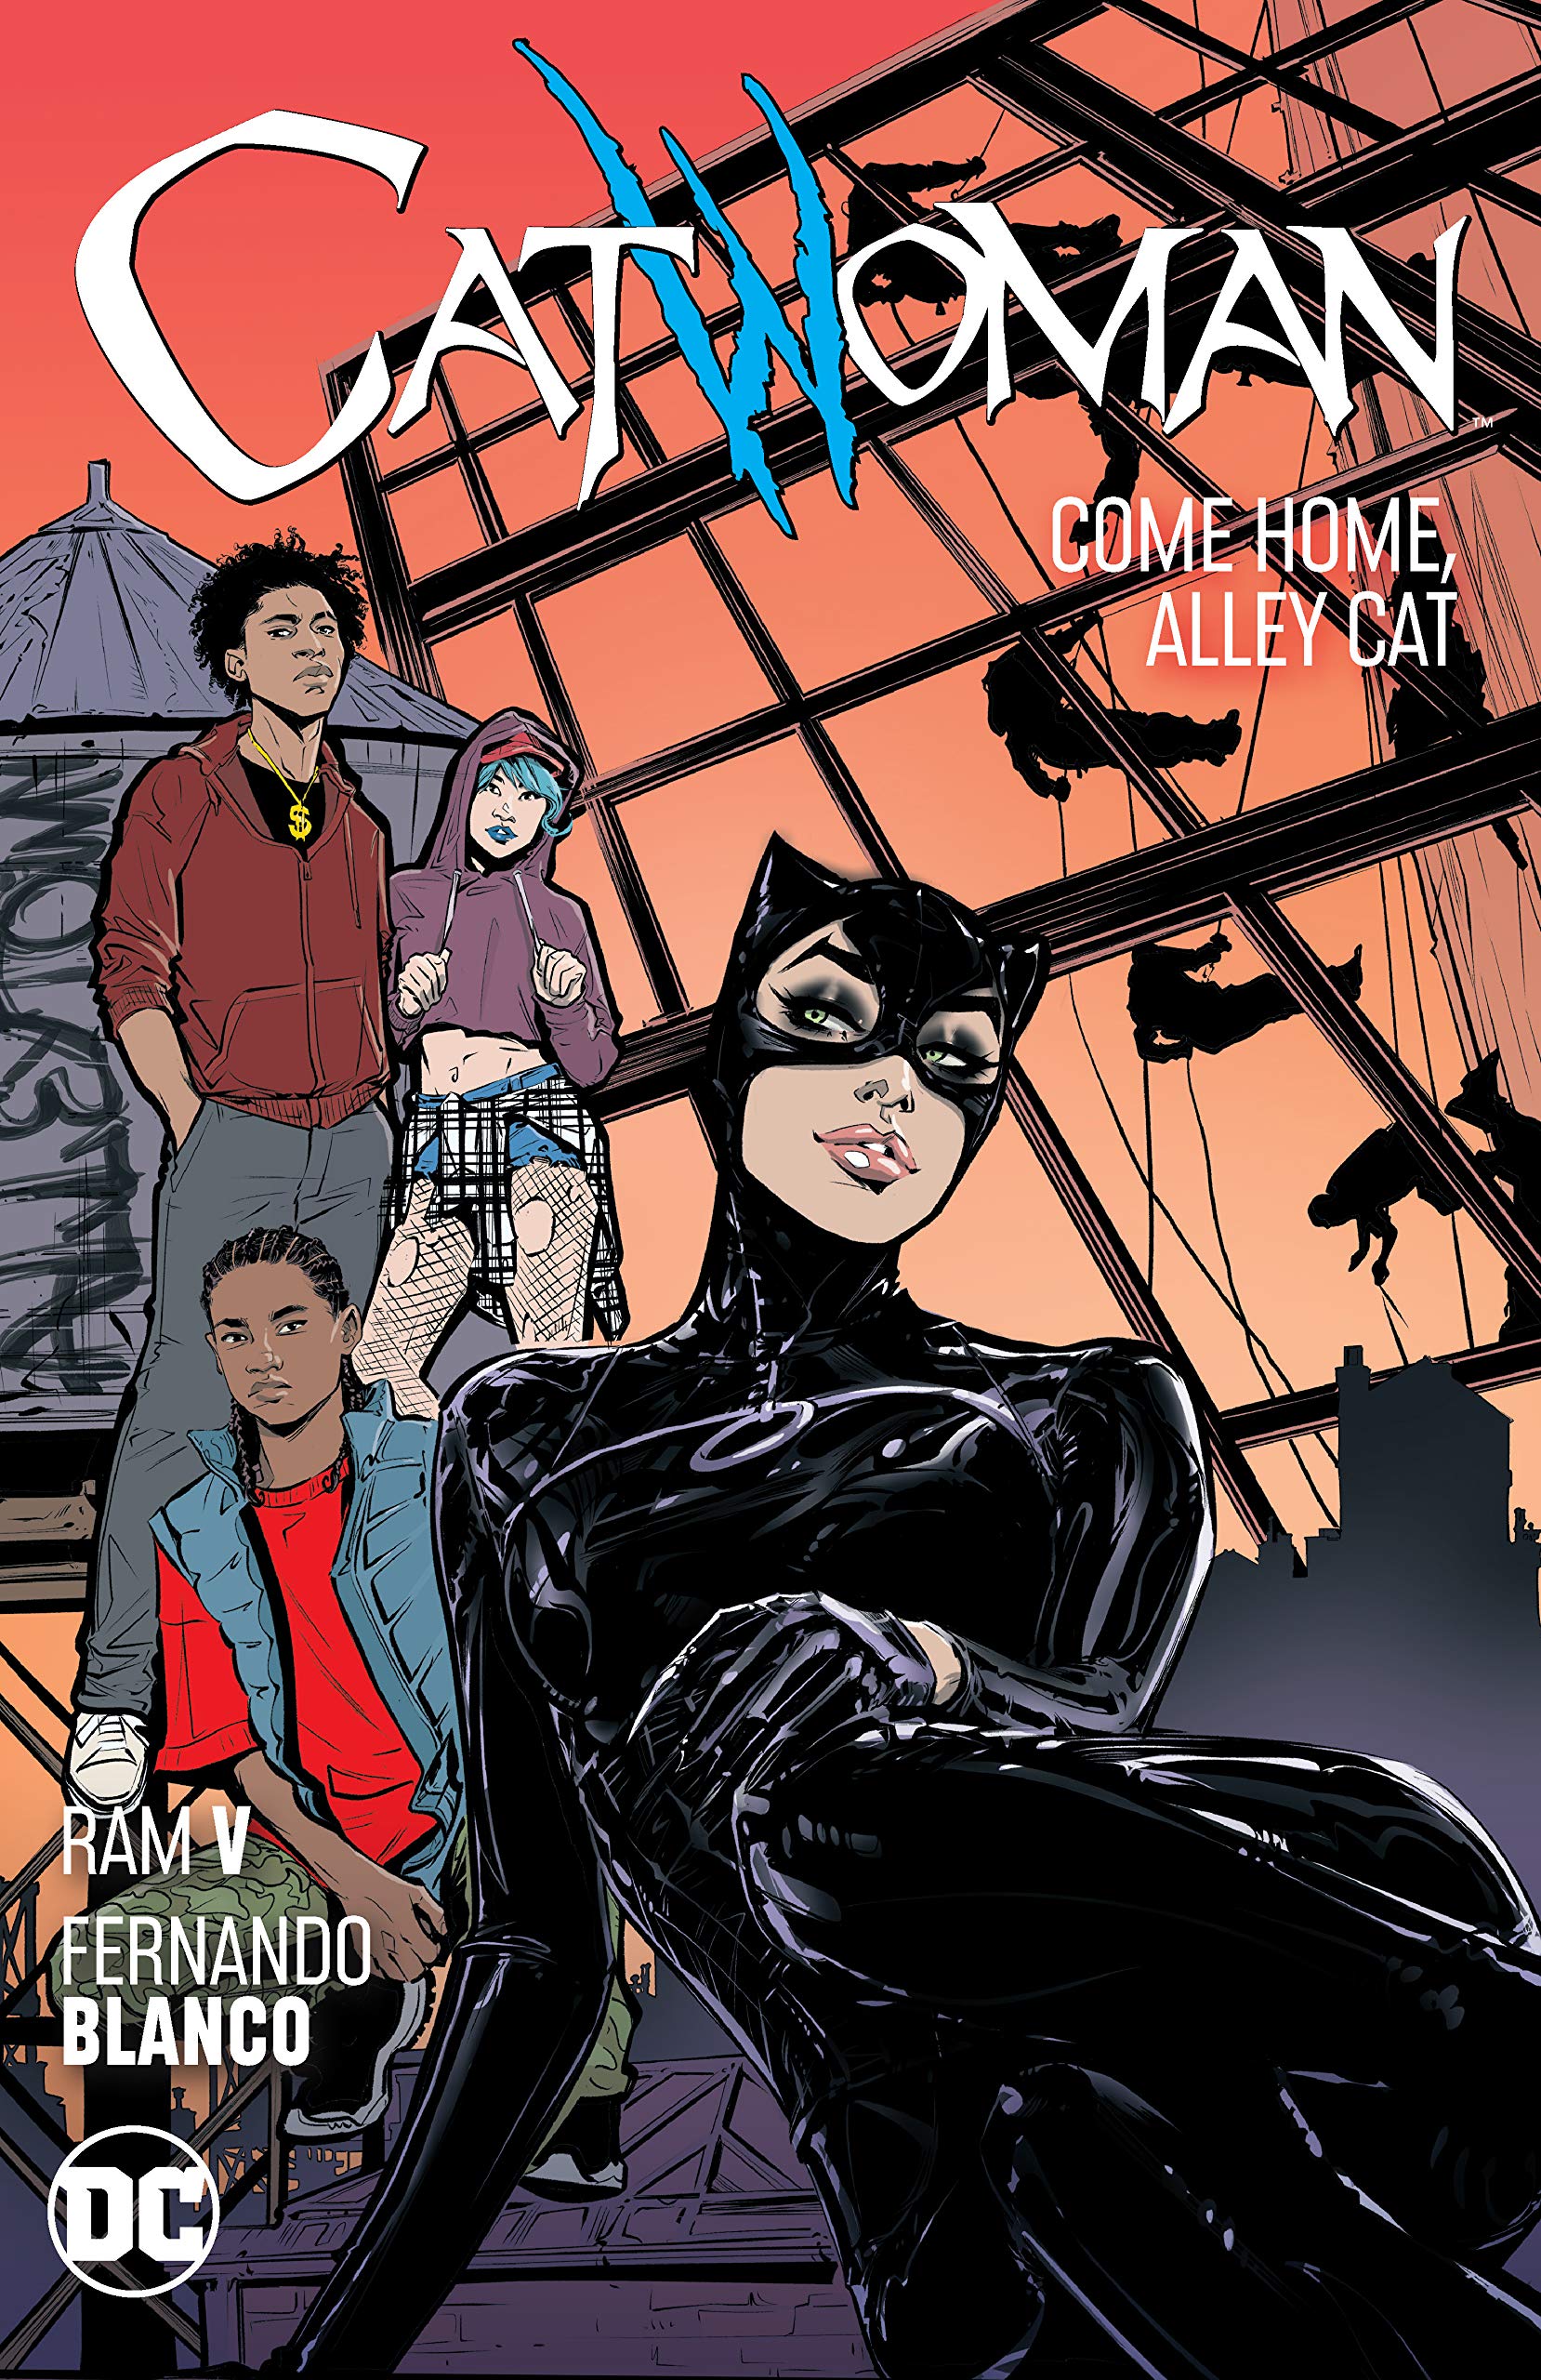 Catwoman - Volume 4: Come Home, Alley Cat